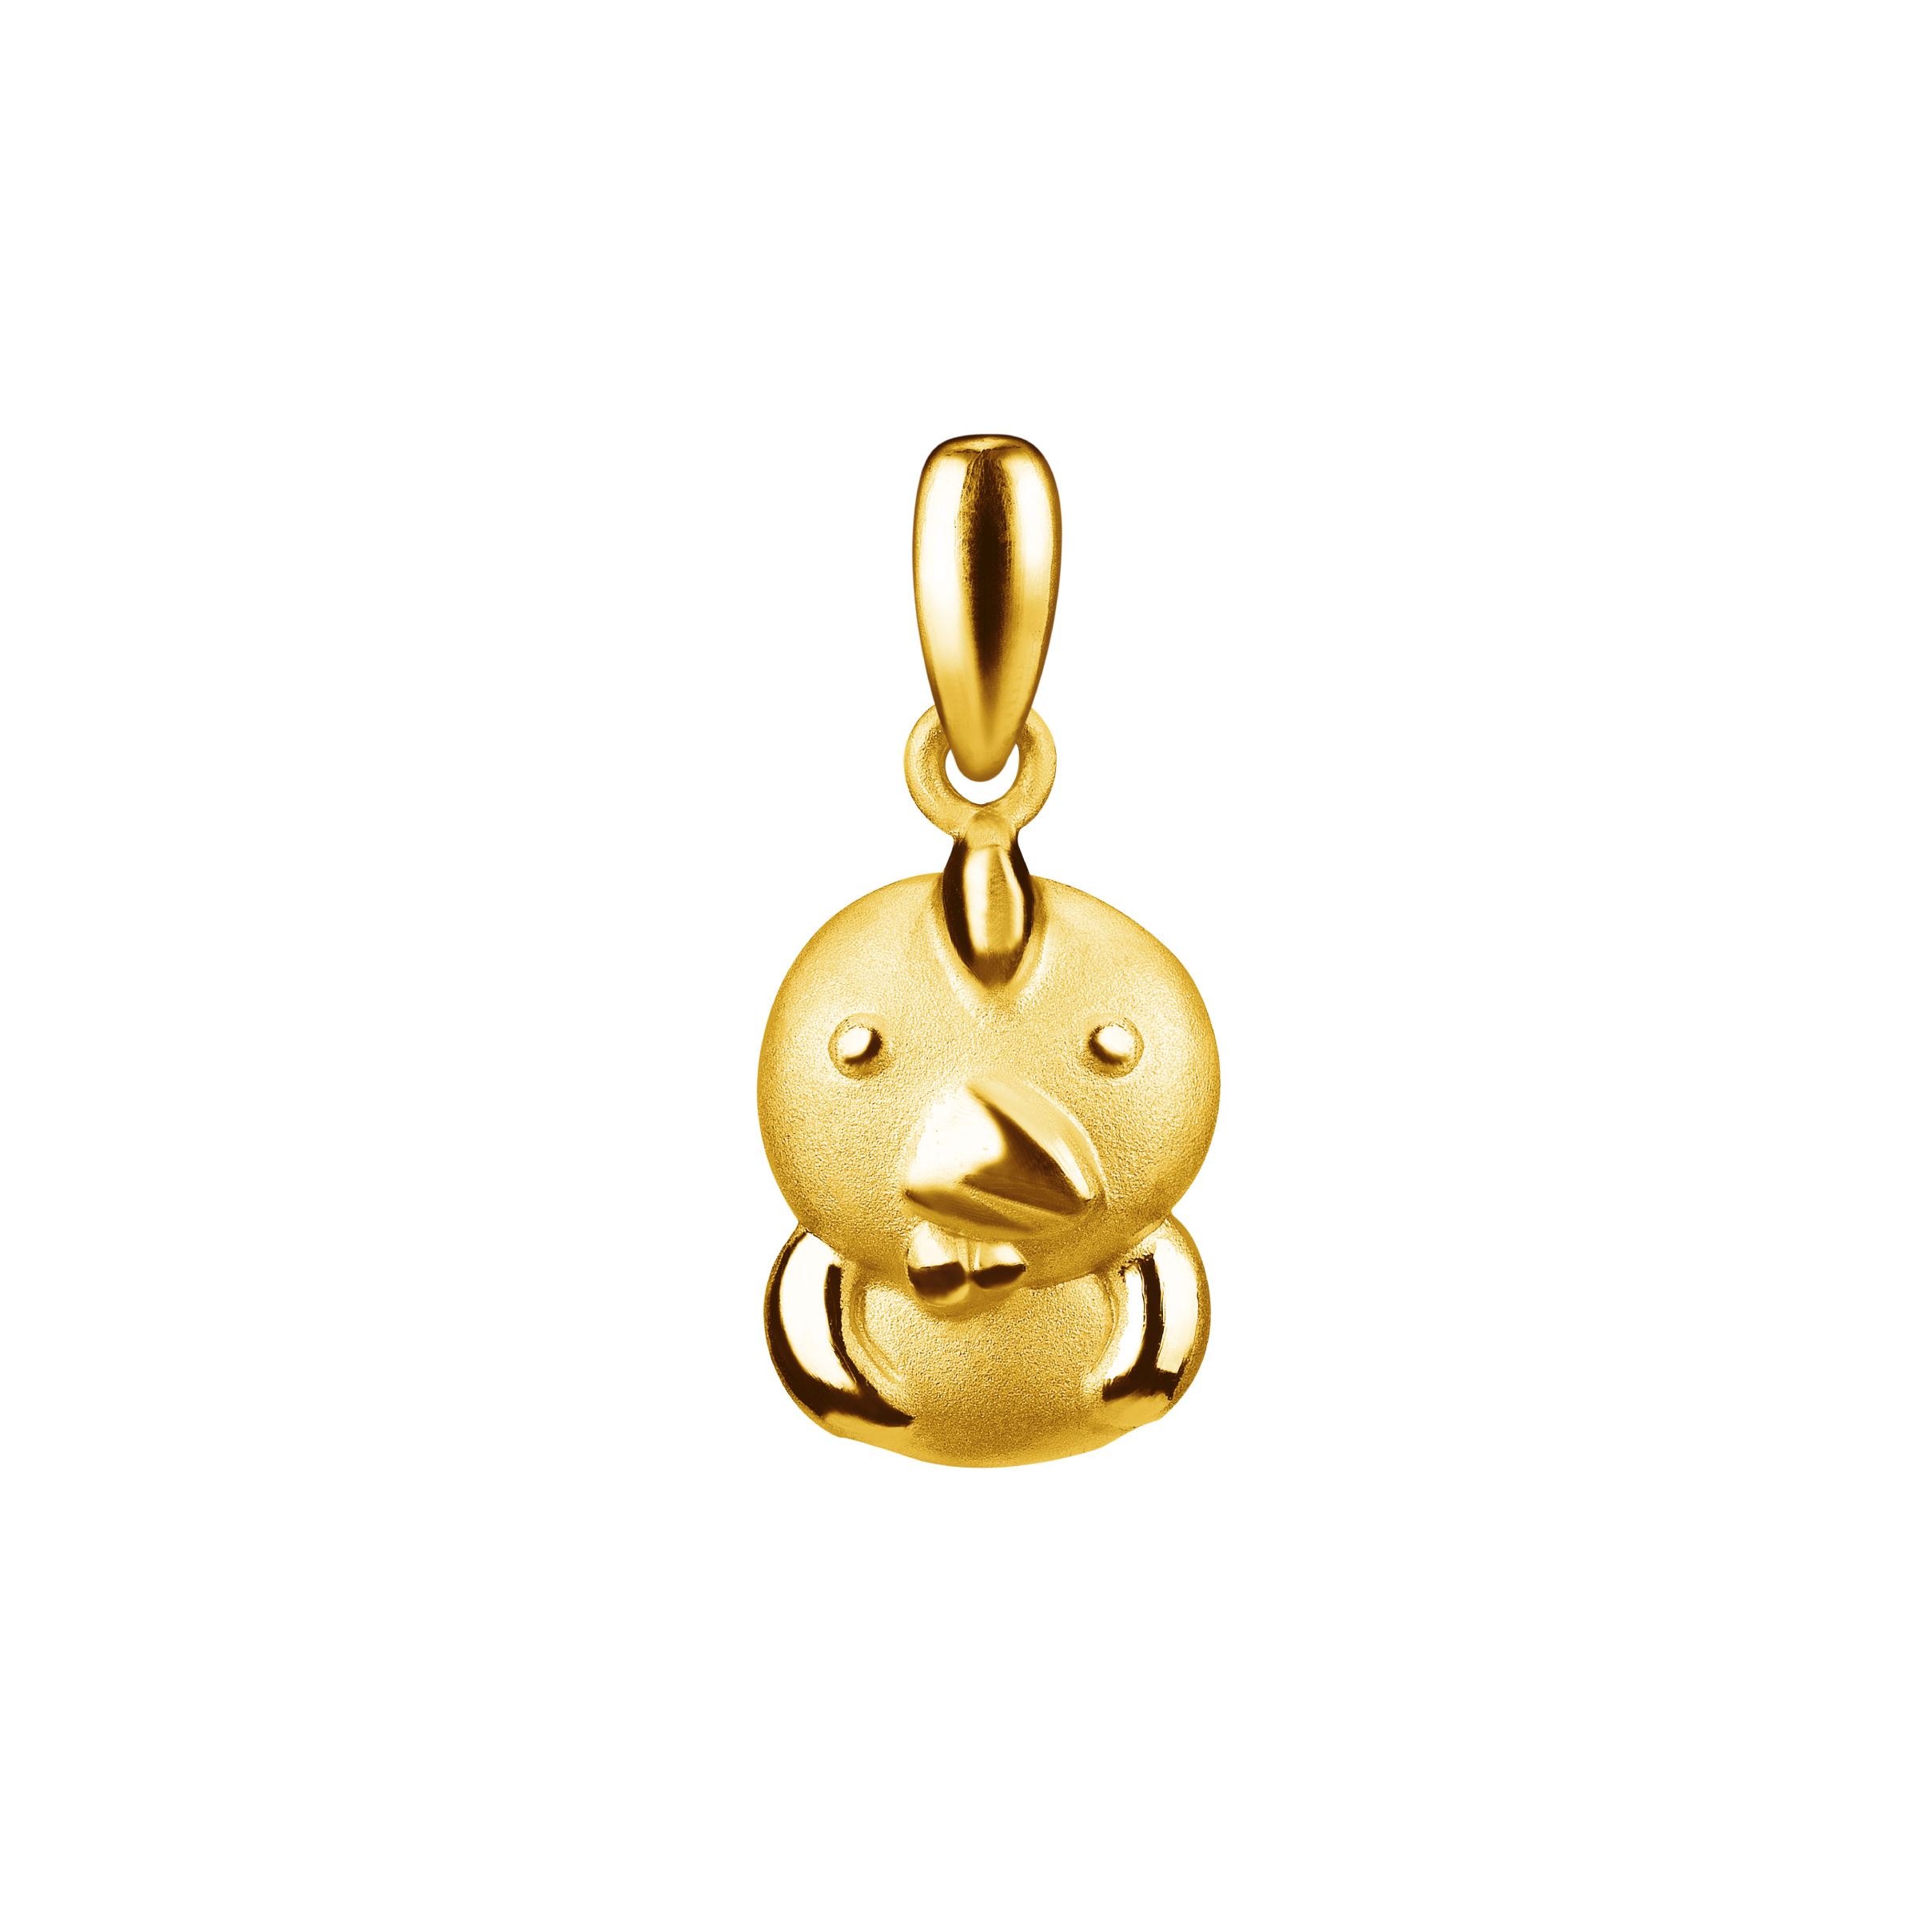 12 Chinese Zodiac Gold Pendant-Rooster